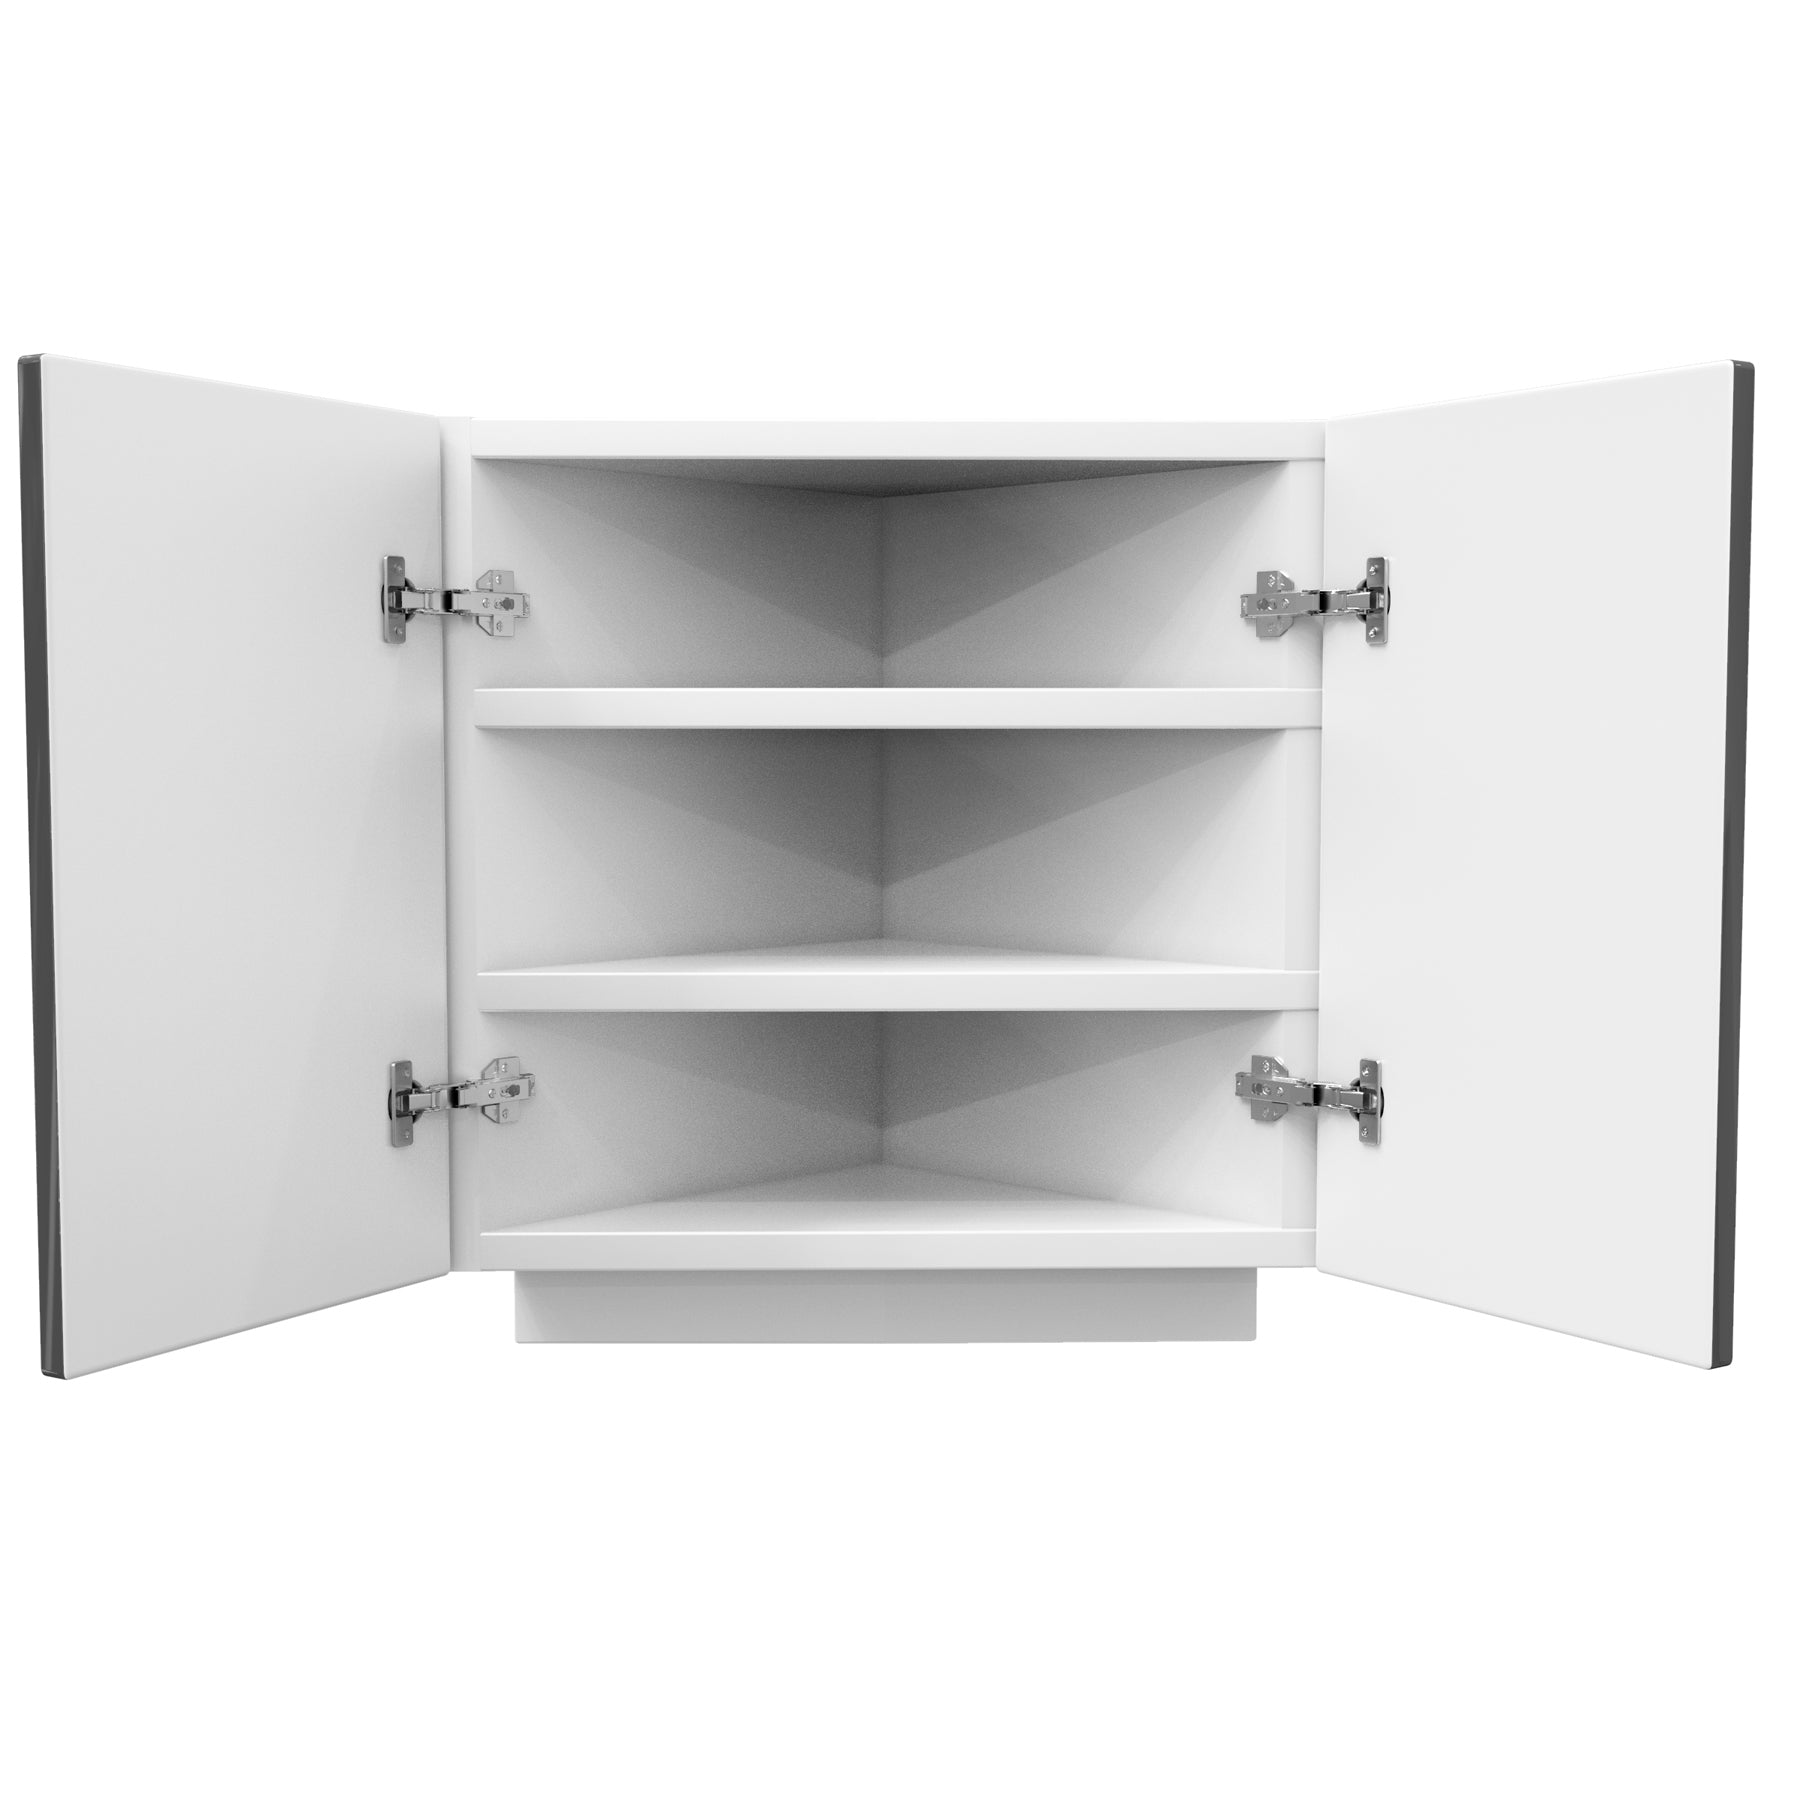 Straight Base End Cabinet | Milano Slate | 24W x 34.5H x 24D